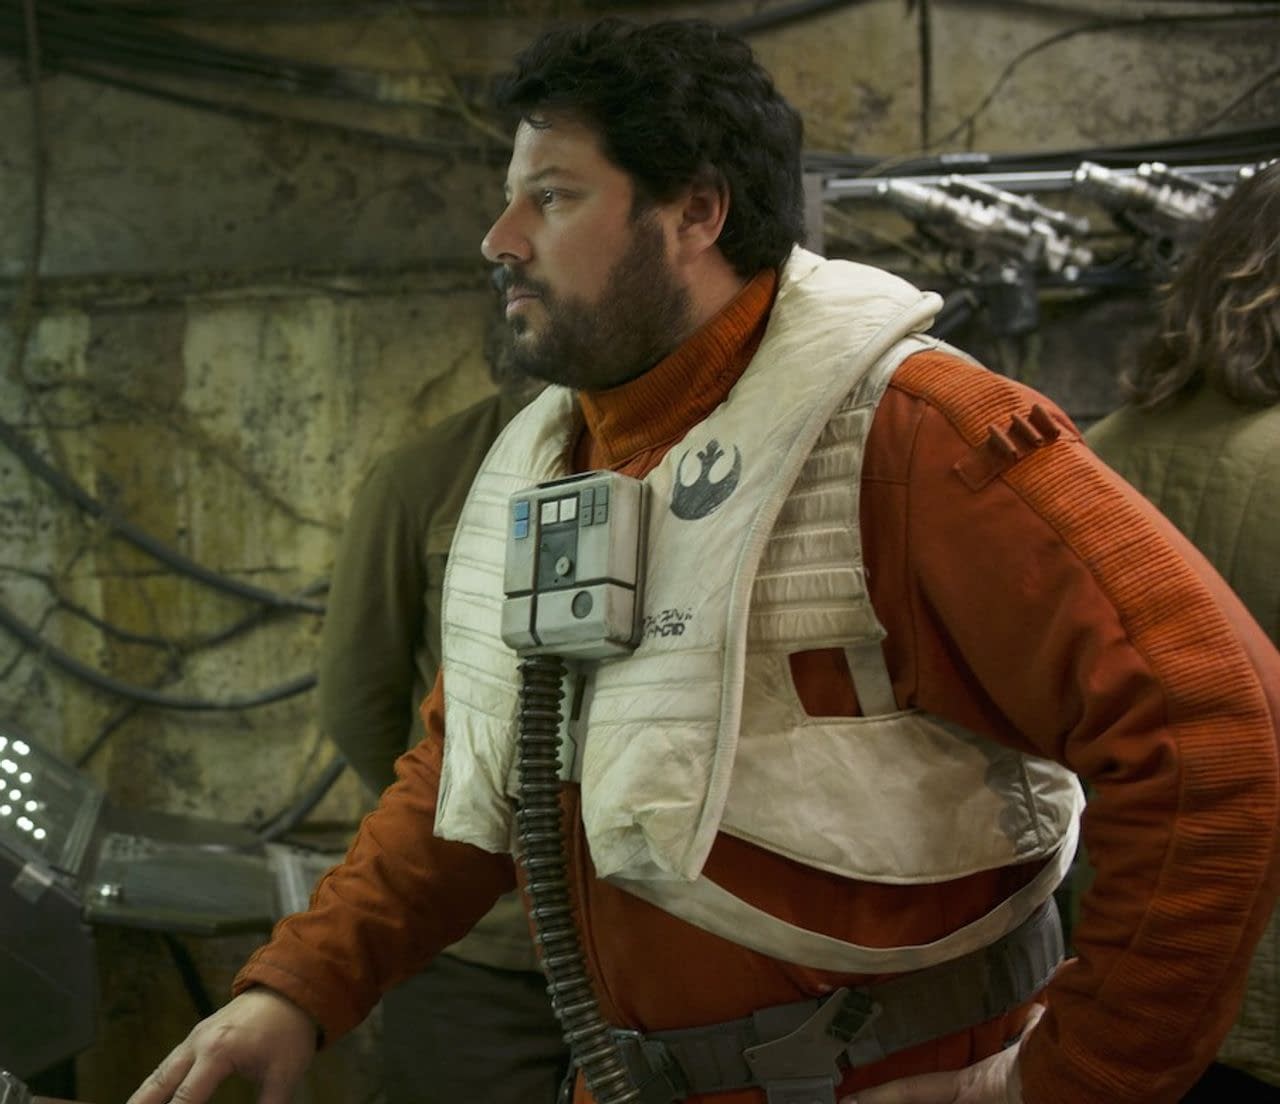 "The Rise of Skywalker": Greg Grunberg Says There is No Directors Cut